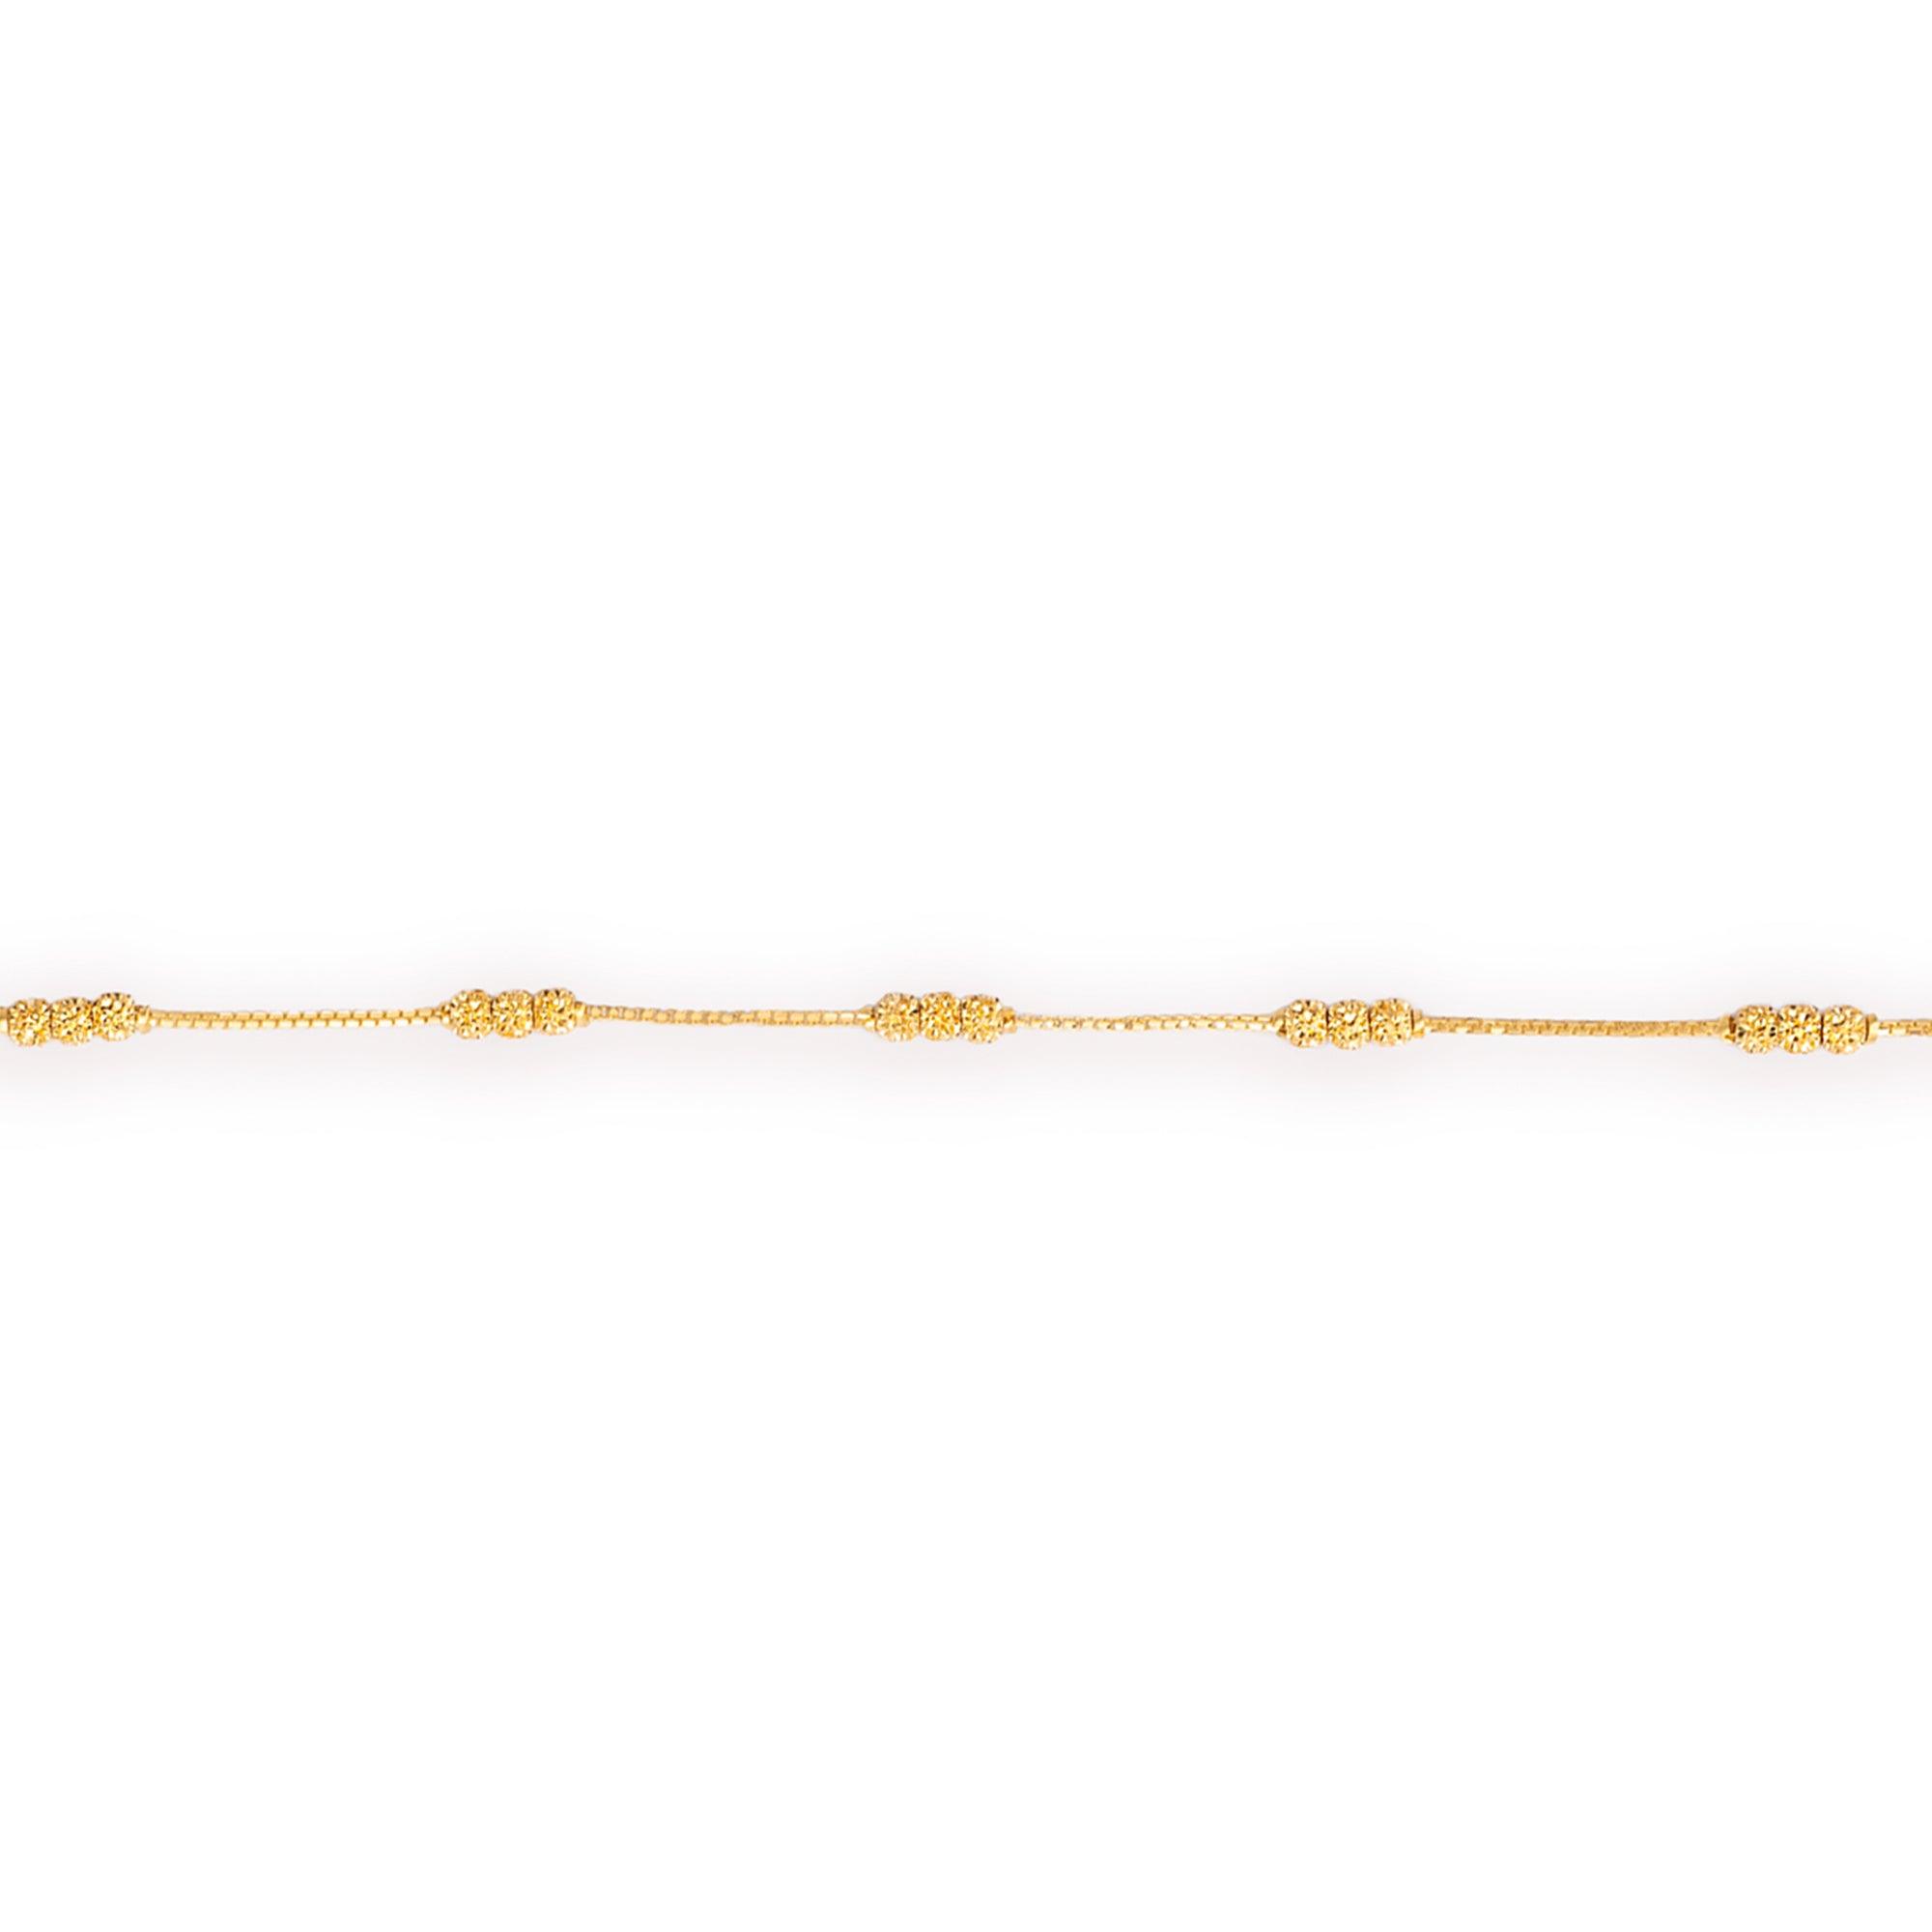 22ct Gold Box Chain Bracelet with Triple Diamond Cut Gold Beads and Hook Clasp (3.2g) LBR-8475b - Minar Jewellers